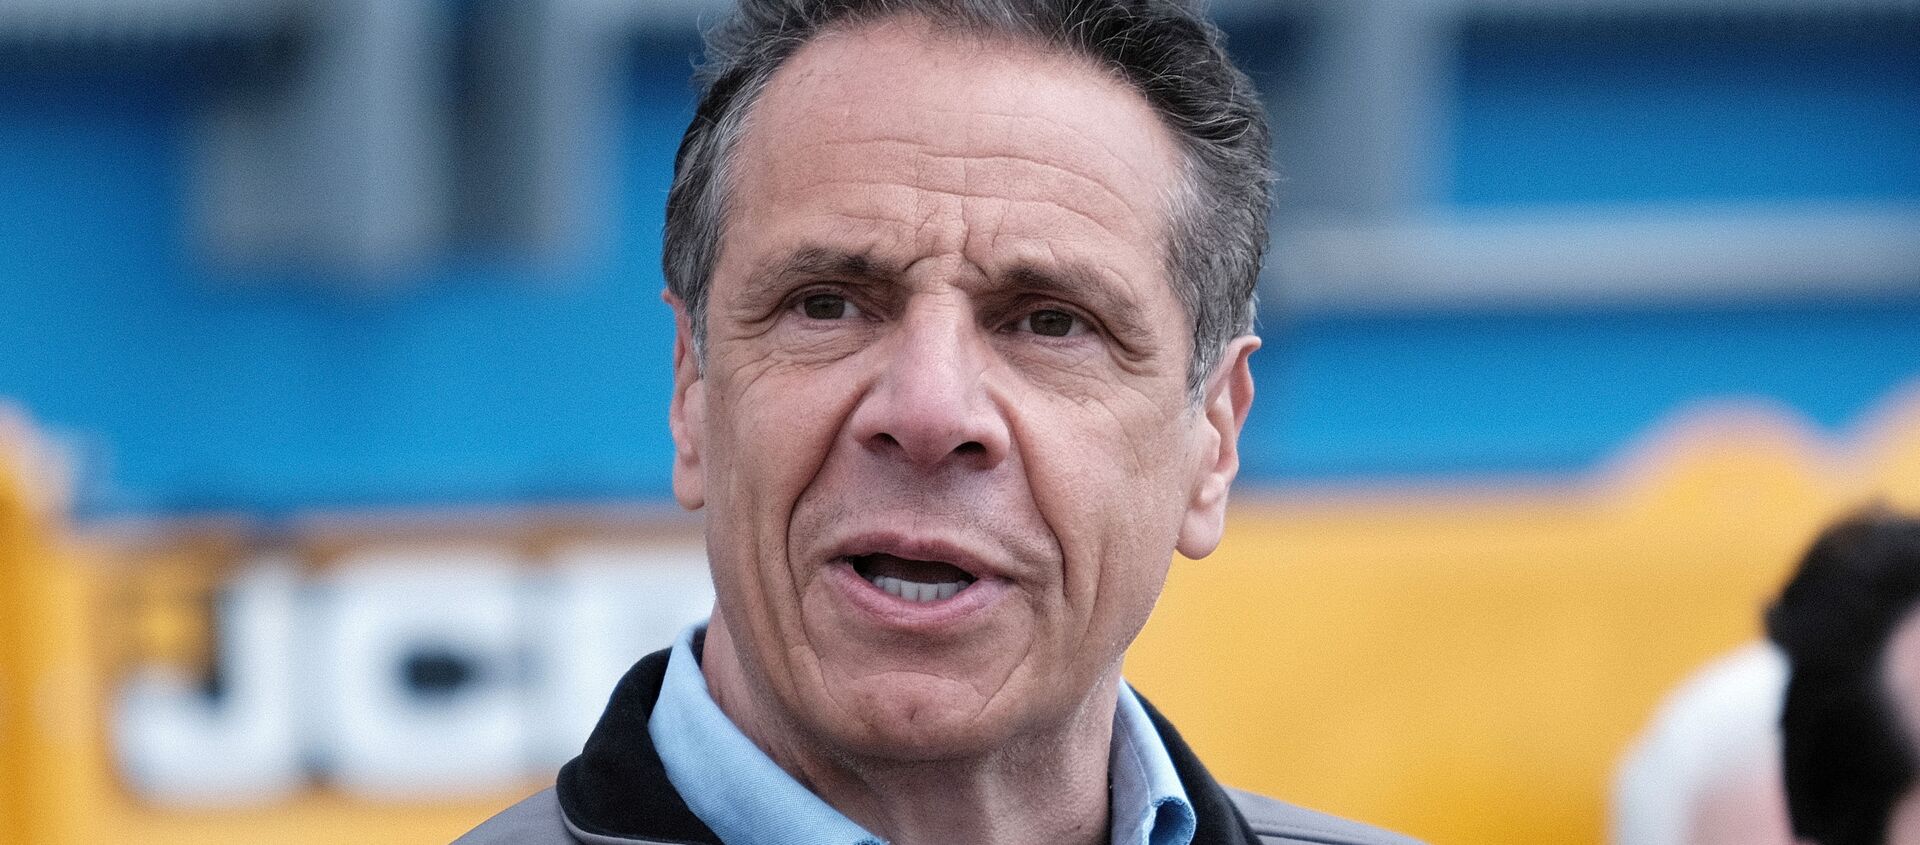 FILE PHOTO: New York Governor Andrew Cuomo speaks during a ground breaking ceremony at the Bay Park Water Reclamation Facility in East Rockaway, New York, U.S., April 22, 2021. Spencer Platt/Pool via REUTERS/File Photo - Sputnik International, 1920, 09.08.2021